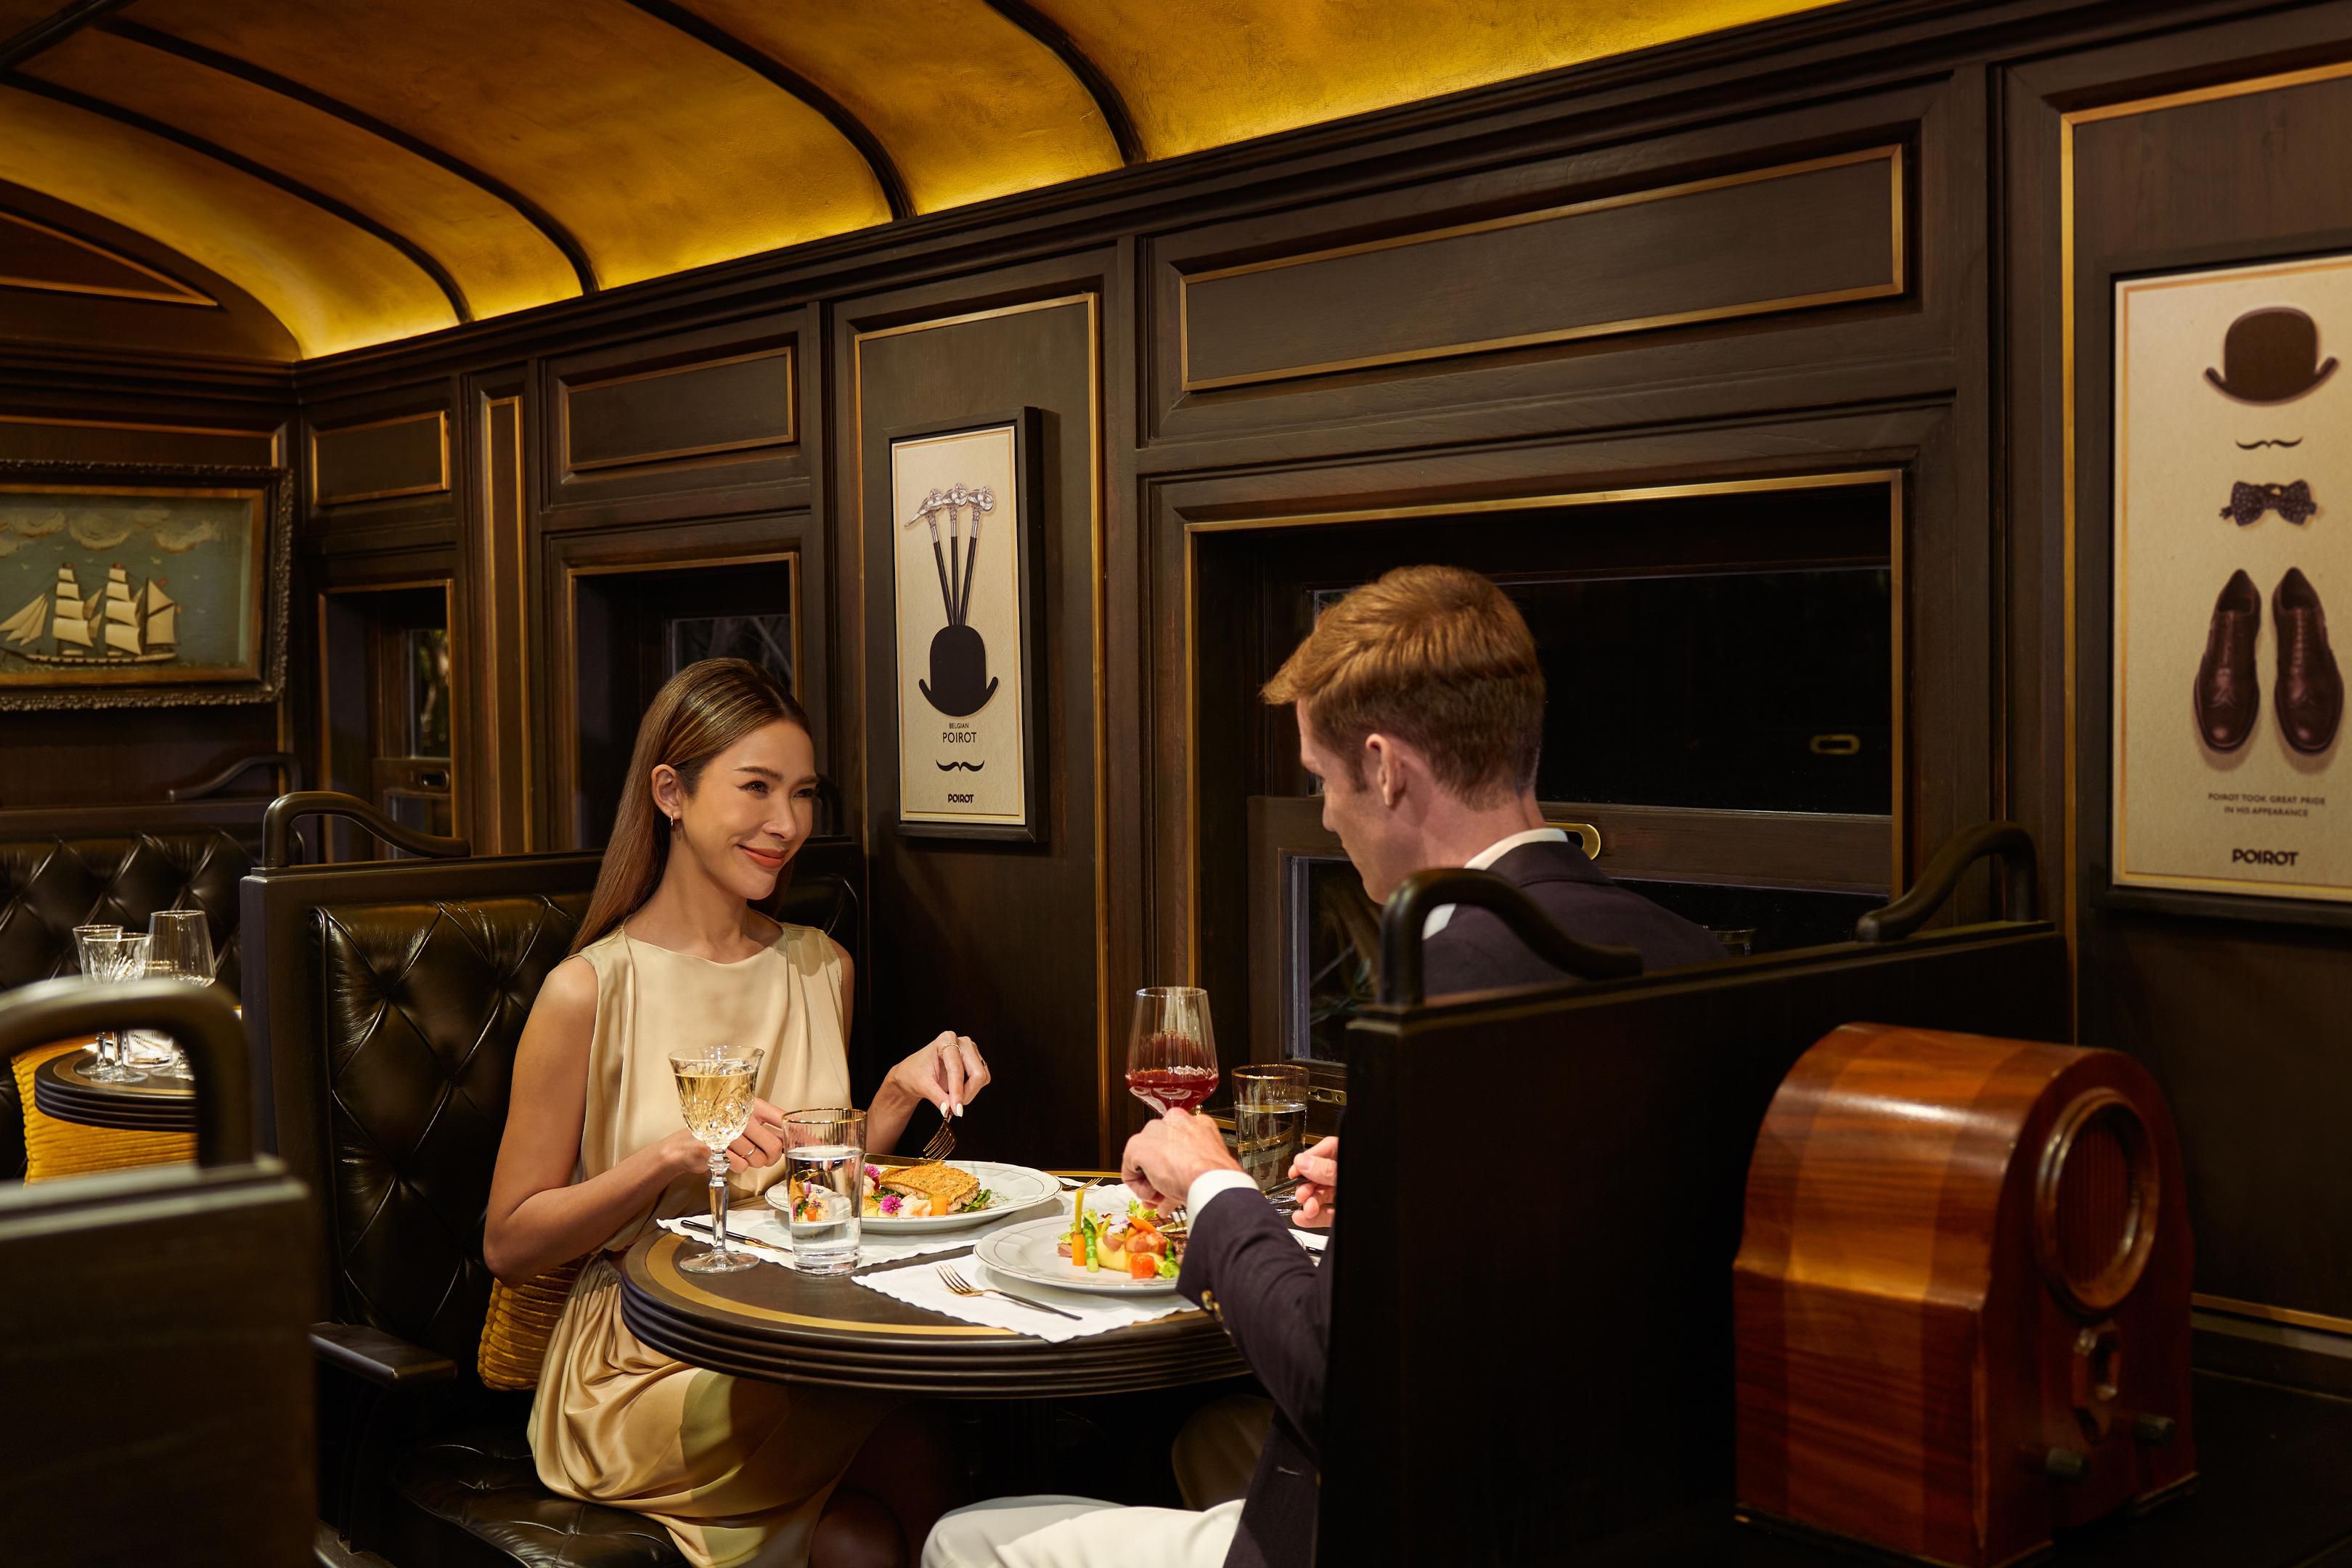 Enjoy an exquisite dining journey on a train carriage at Poirot